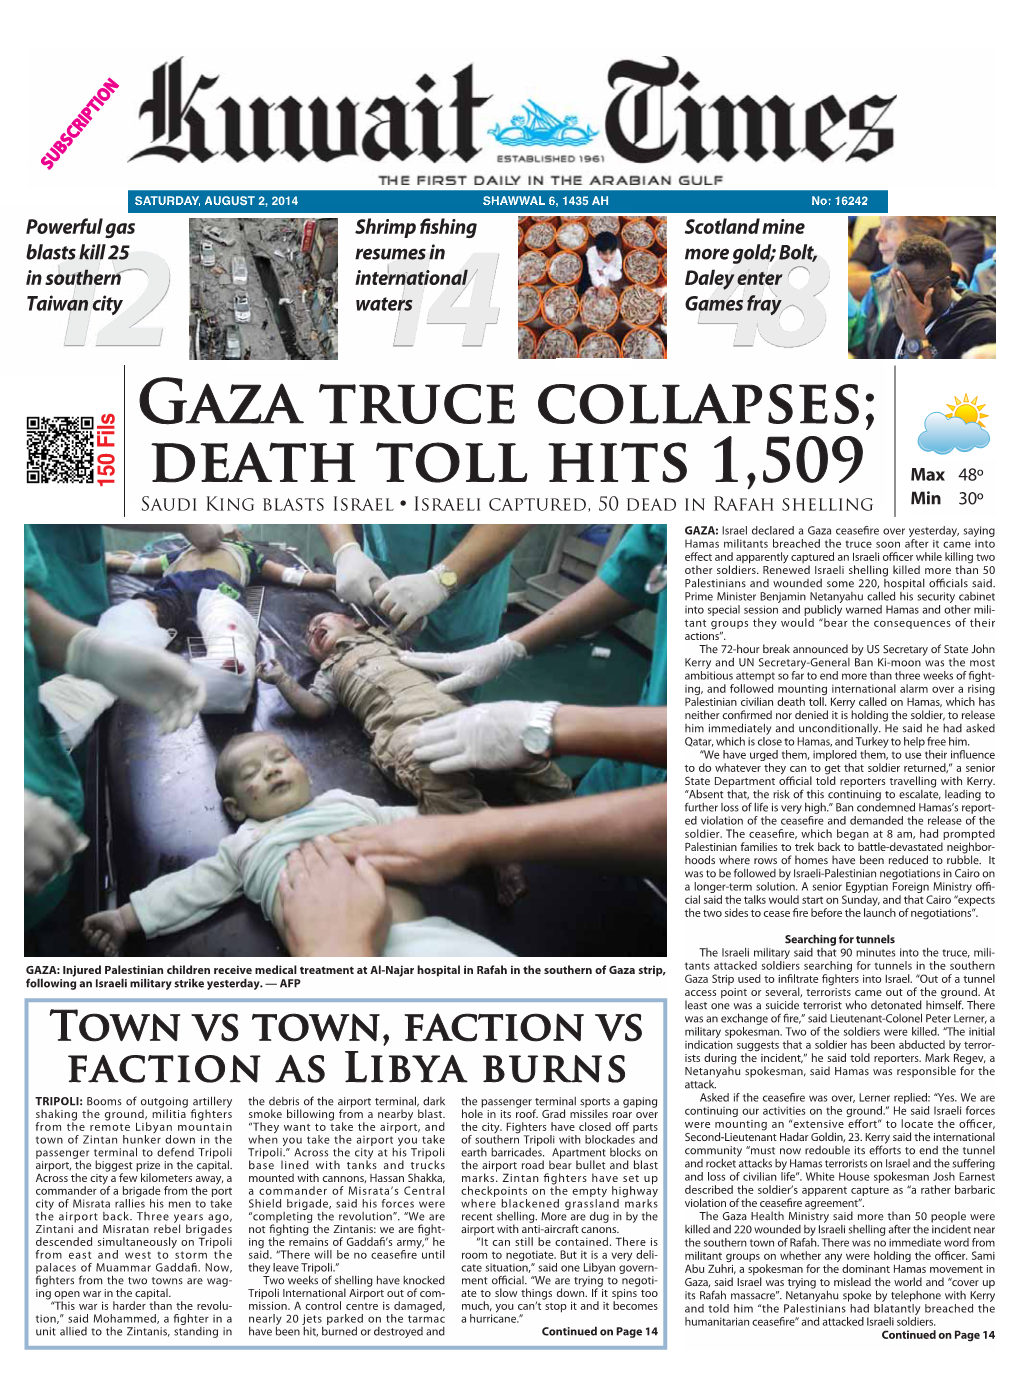 Gaza Truce Collapses; Death Toll